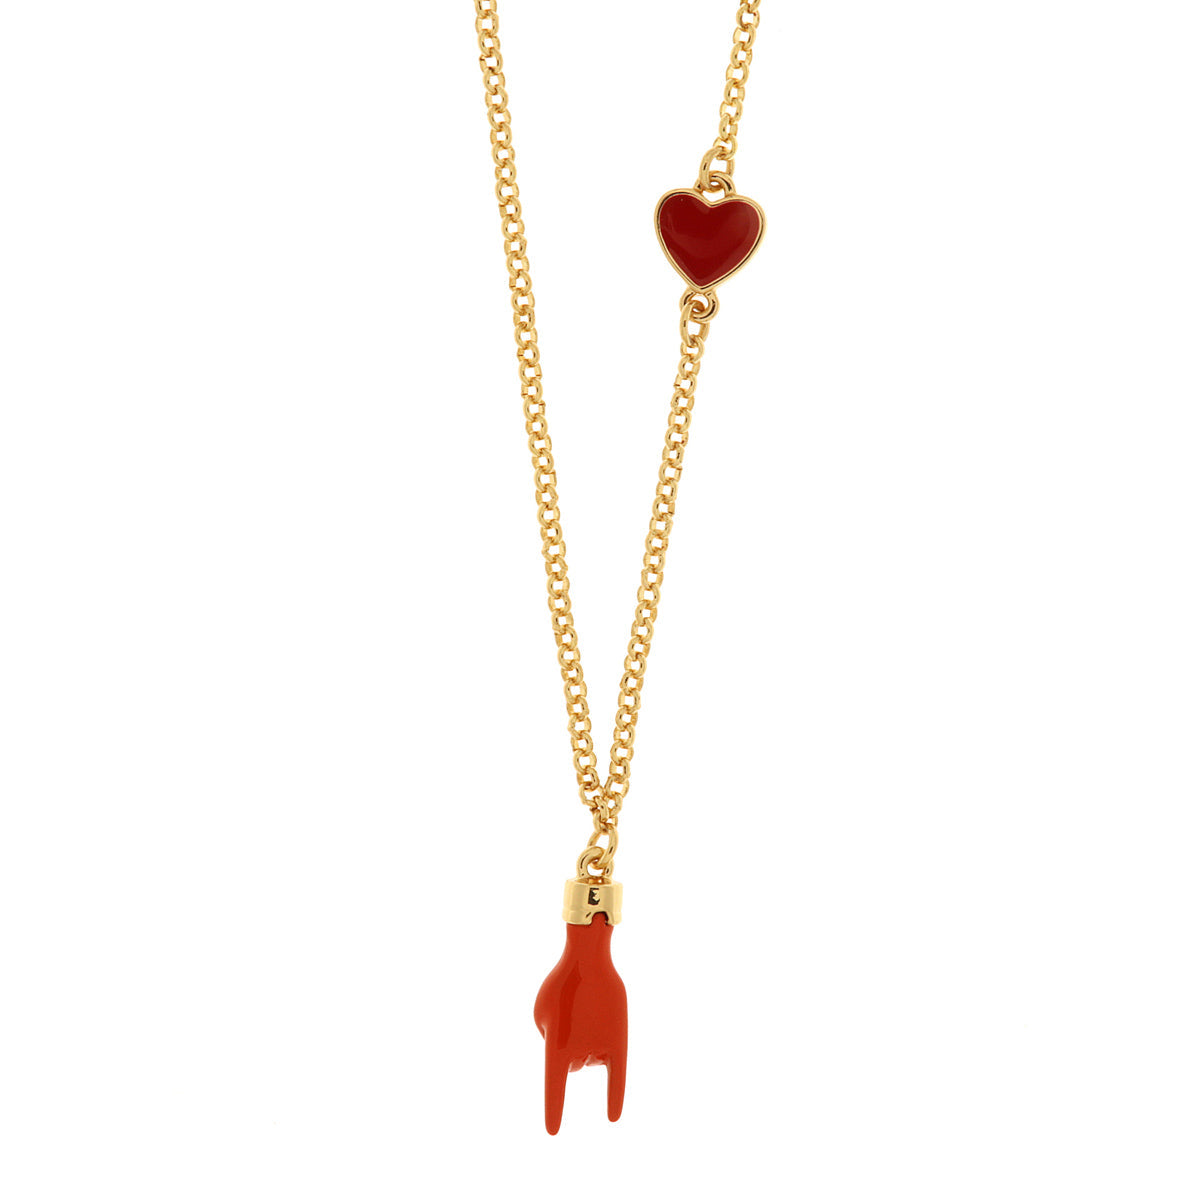 Metal necklace with horns in the shape of a horns brings luck and red heart